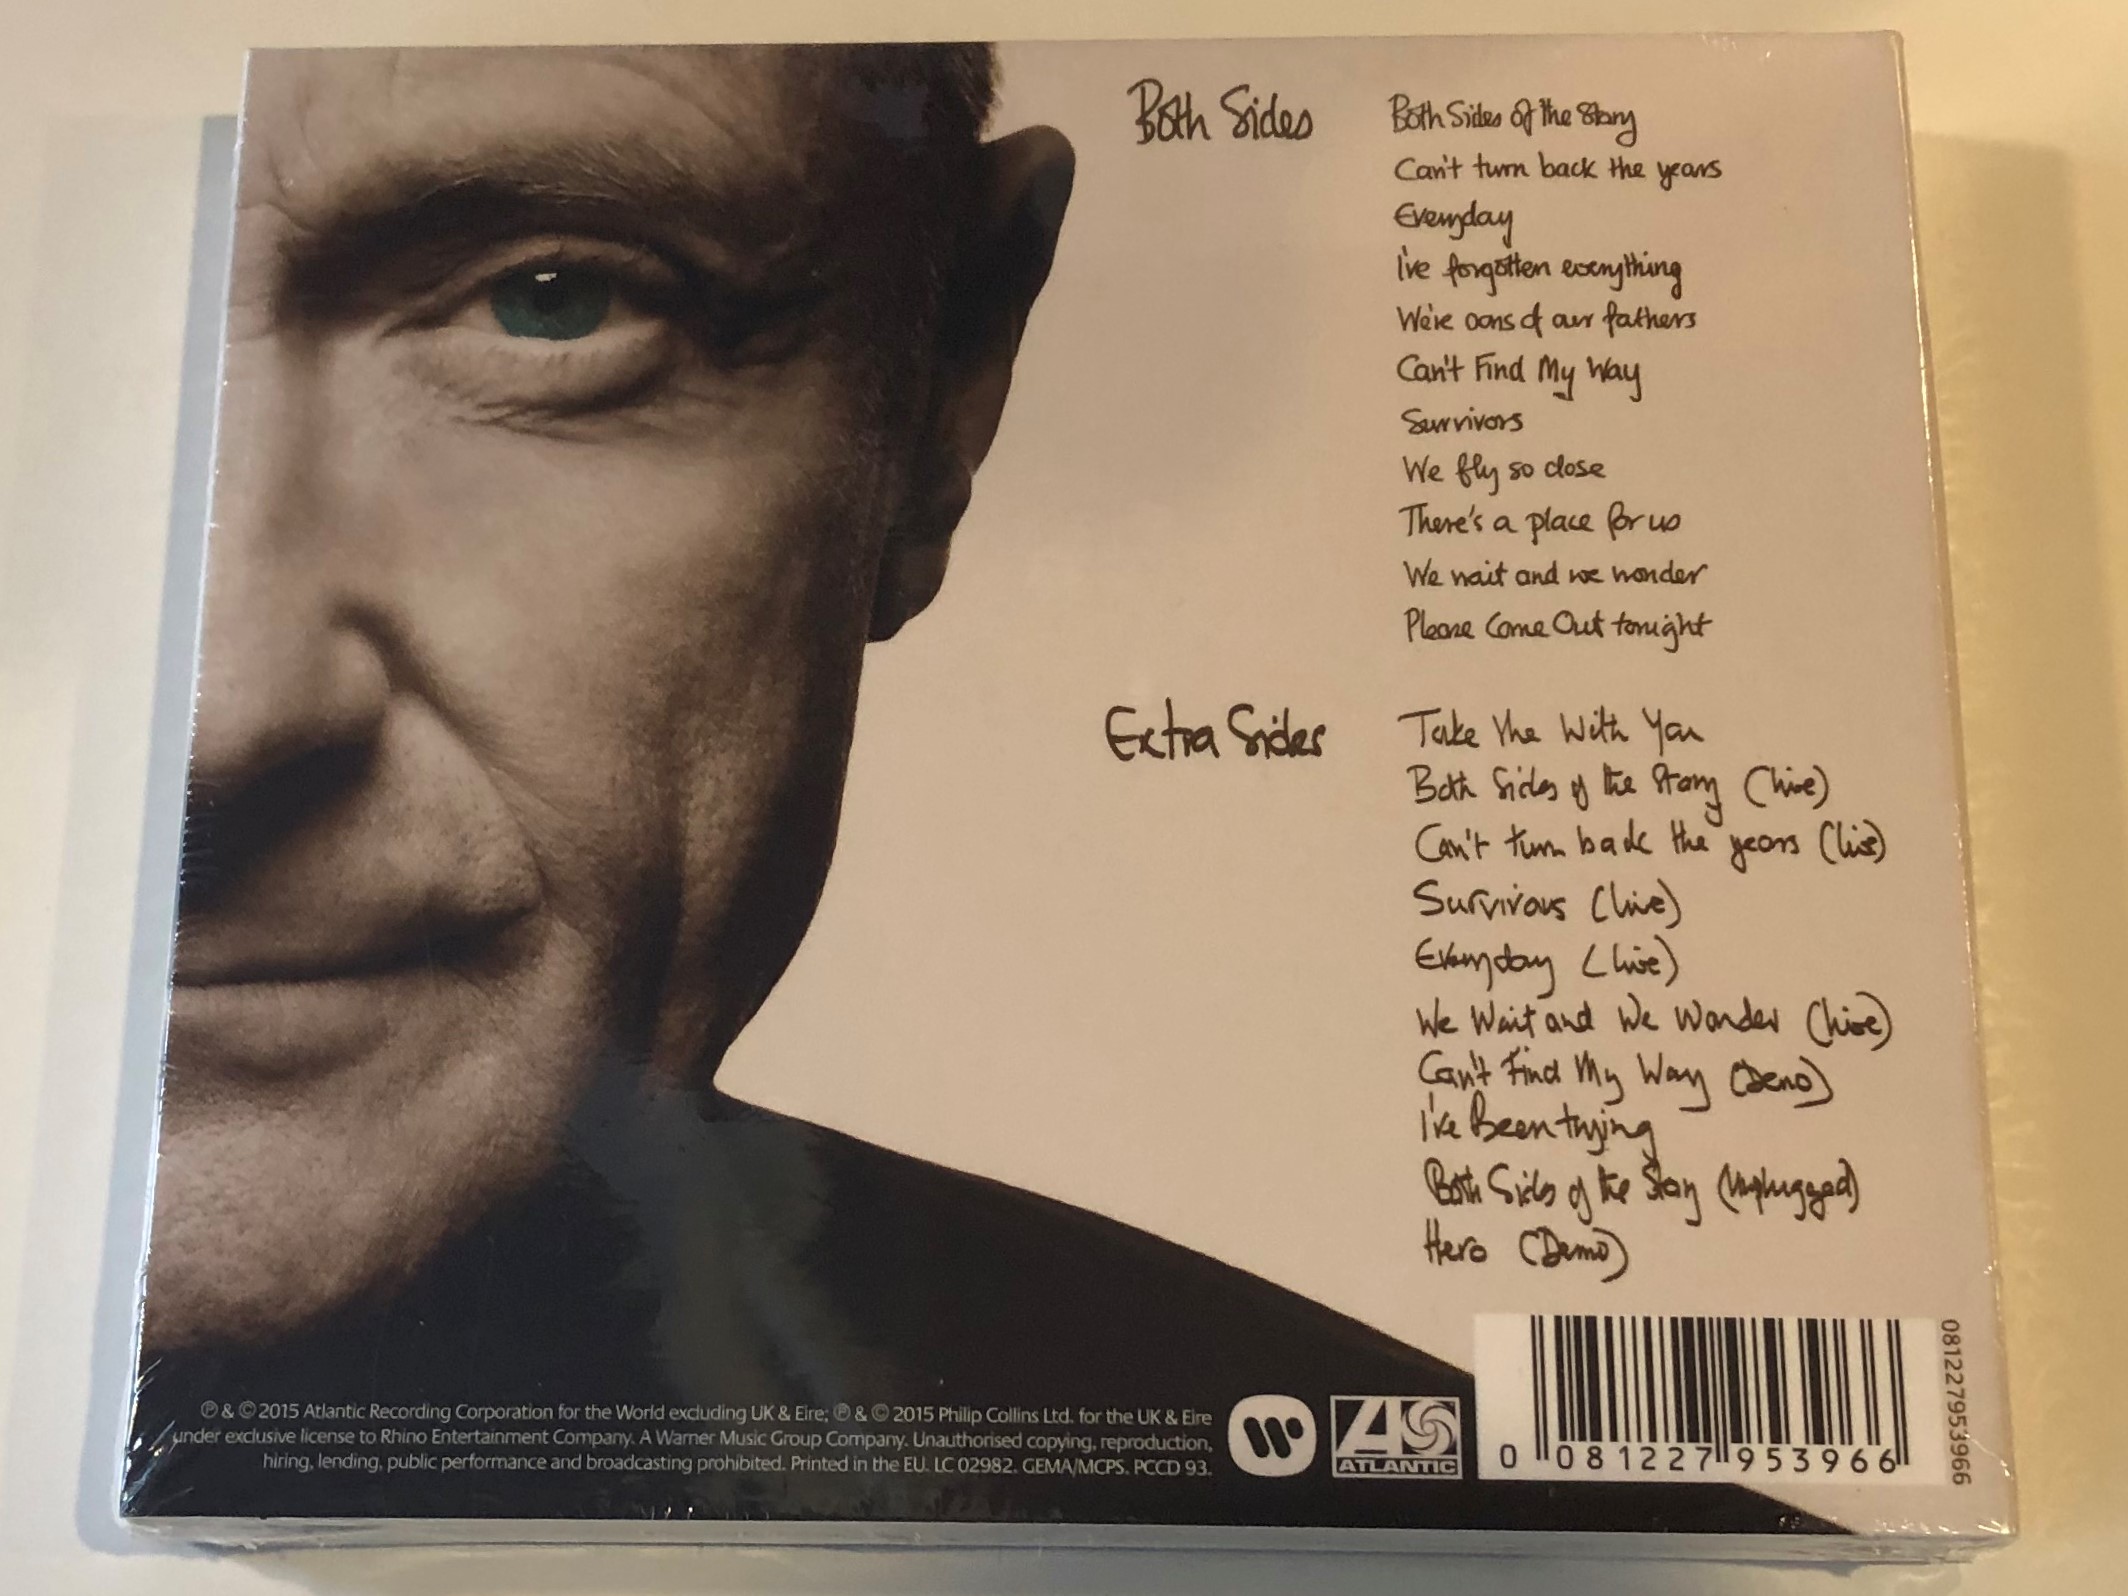 both-sides-phil-collins-2cd-deluxe-edition-includes-rarities-previlously-unavailable-on-cd-atlantic-2x-audio-cd-2015-081227953966-2-.jpg